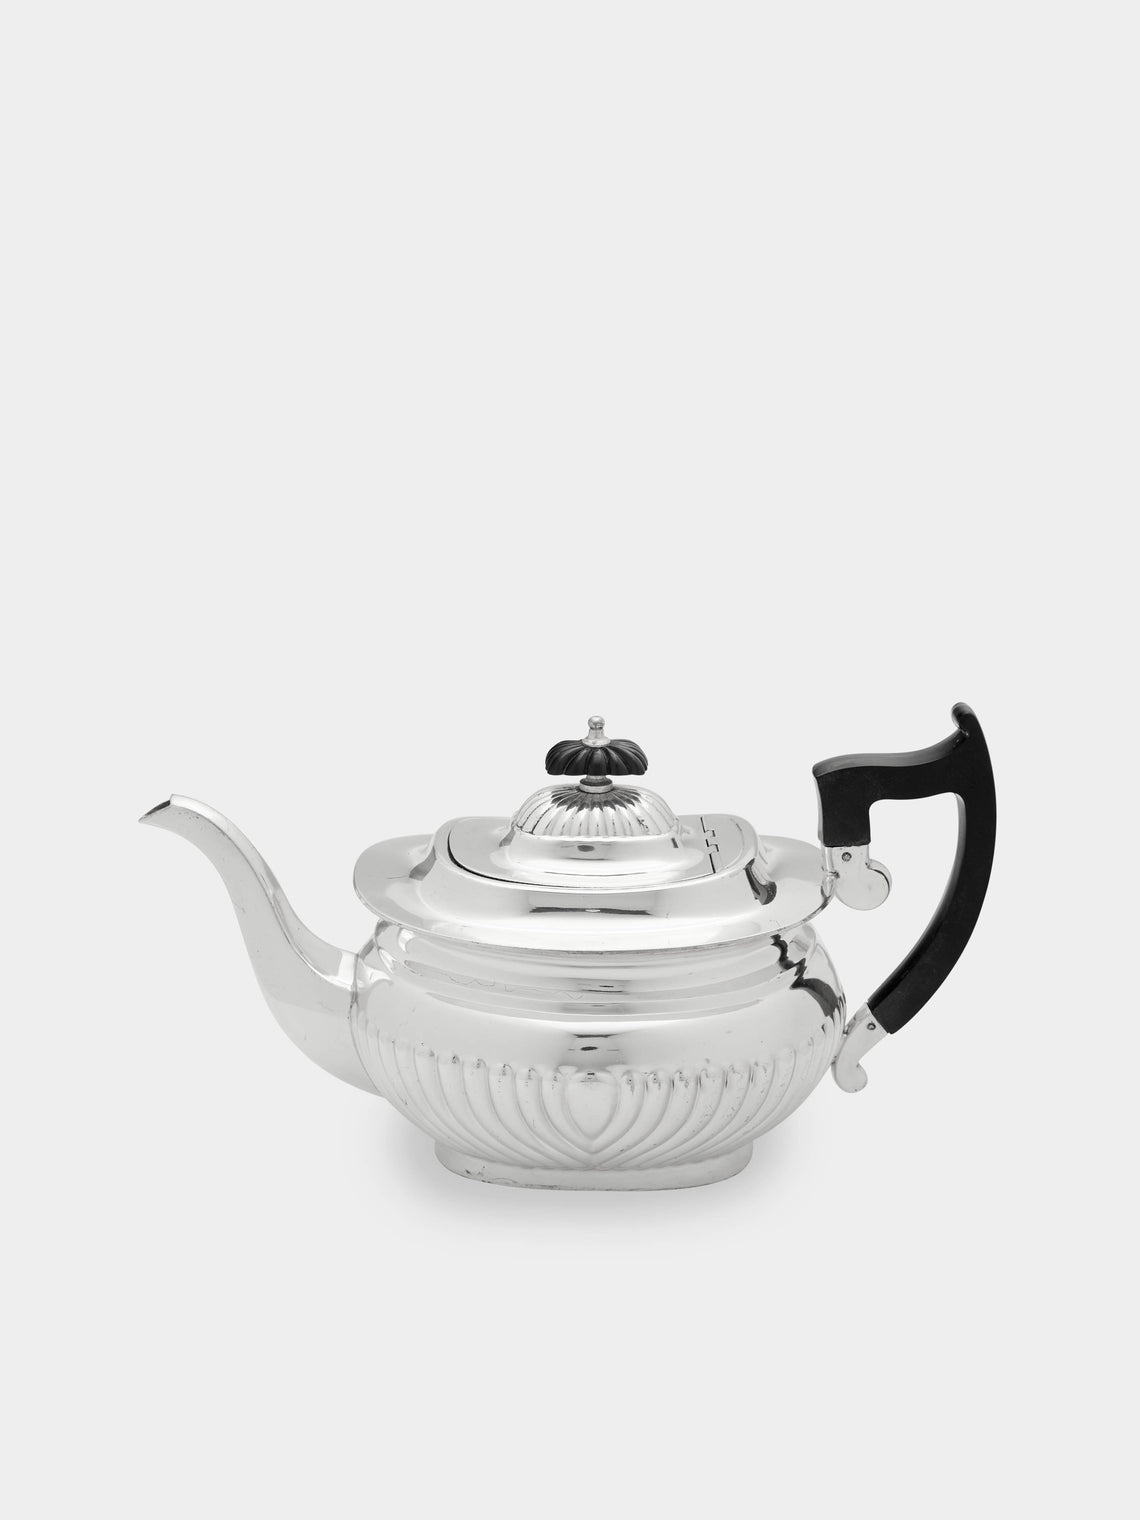 Antique and Vintage - 1900s Silver-Plated Teapot -  - ABASK - 